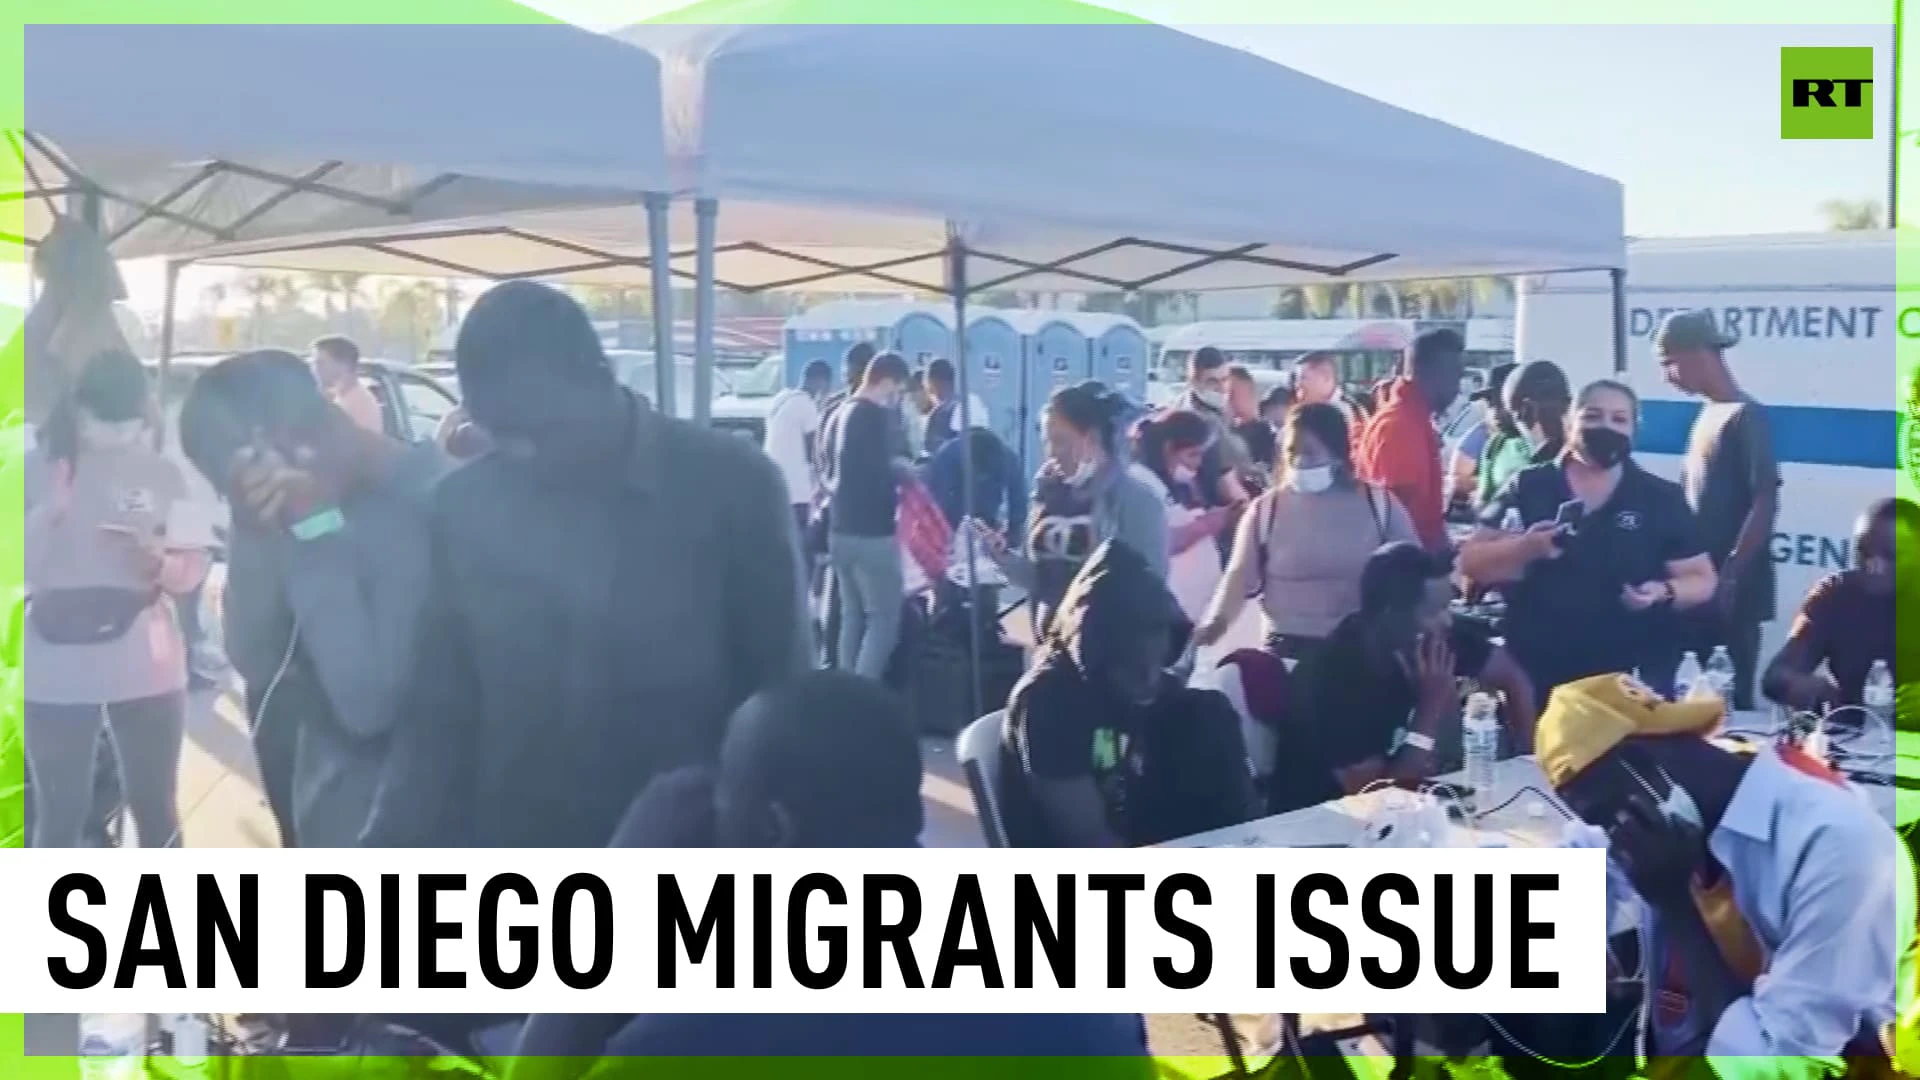 Migrants sent into streets of San Diego as shelters overflow